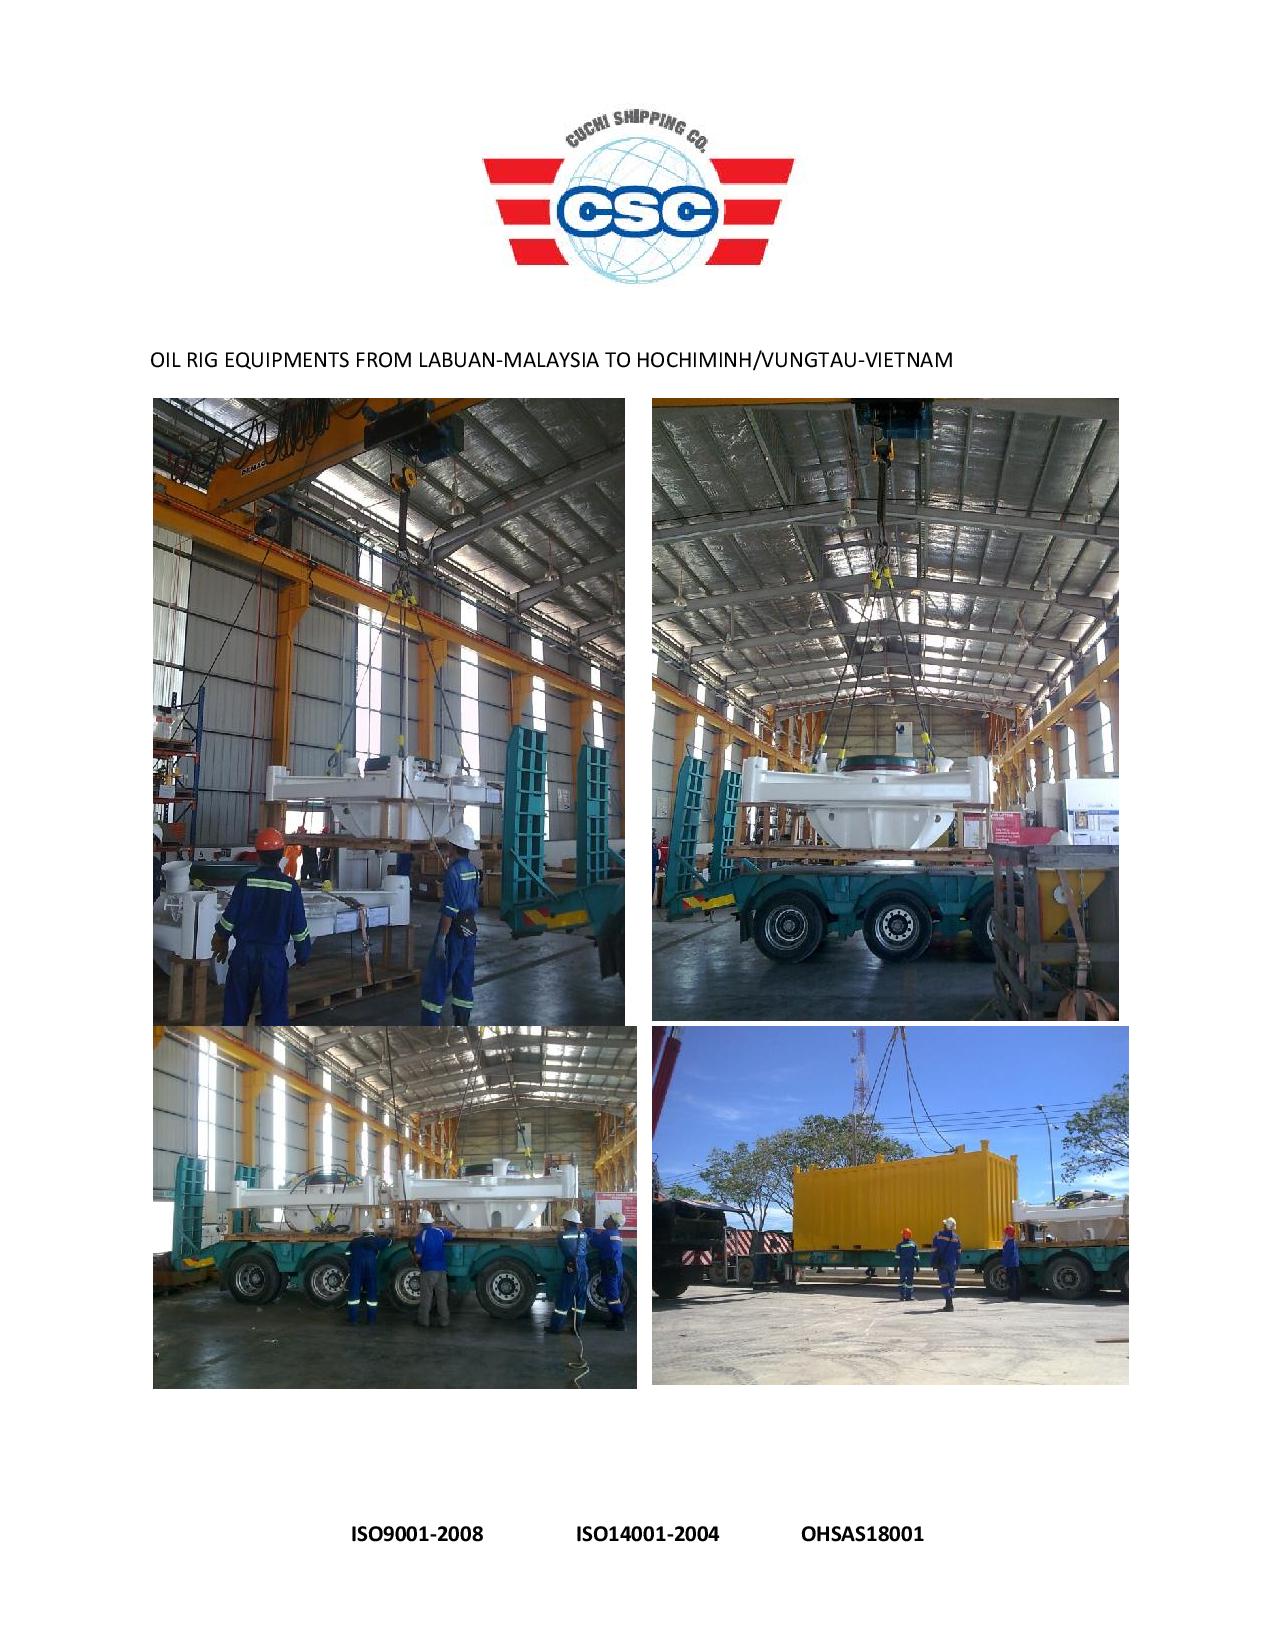 2013 ORIGIN ENERGY EXPLORATORY DRILLING PROJECT-MOVING EQUIPMENTS FROM LABUAN TO PTSC BASE-001.jpg